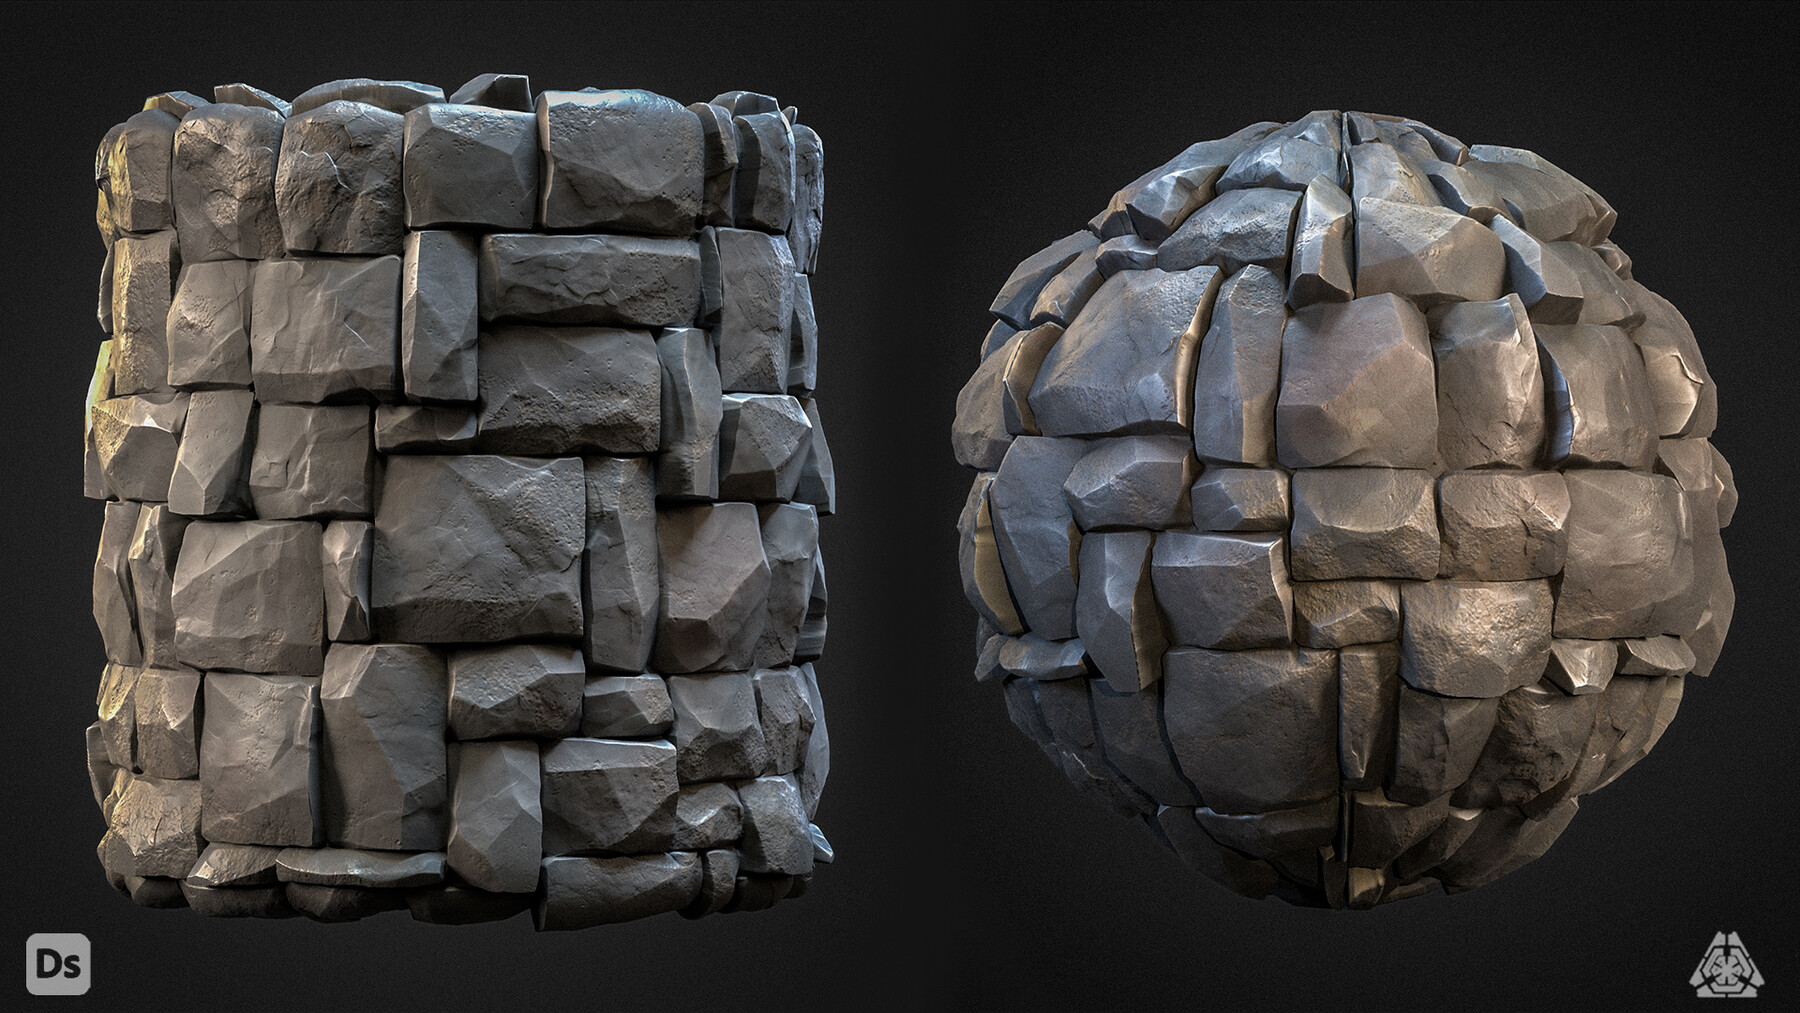 ArtStation - 8 High Quality Stylized Stone Material | Game Assets